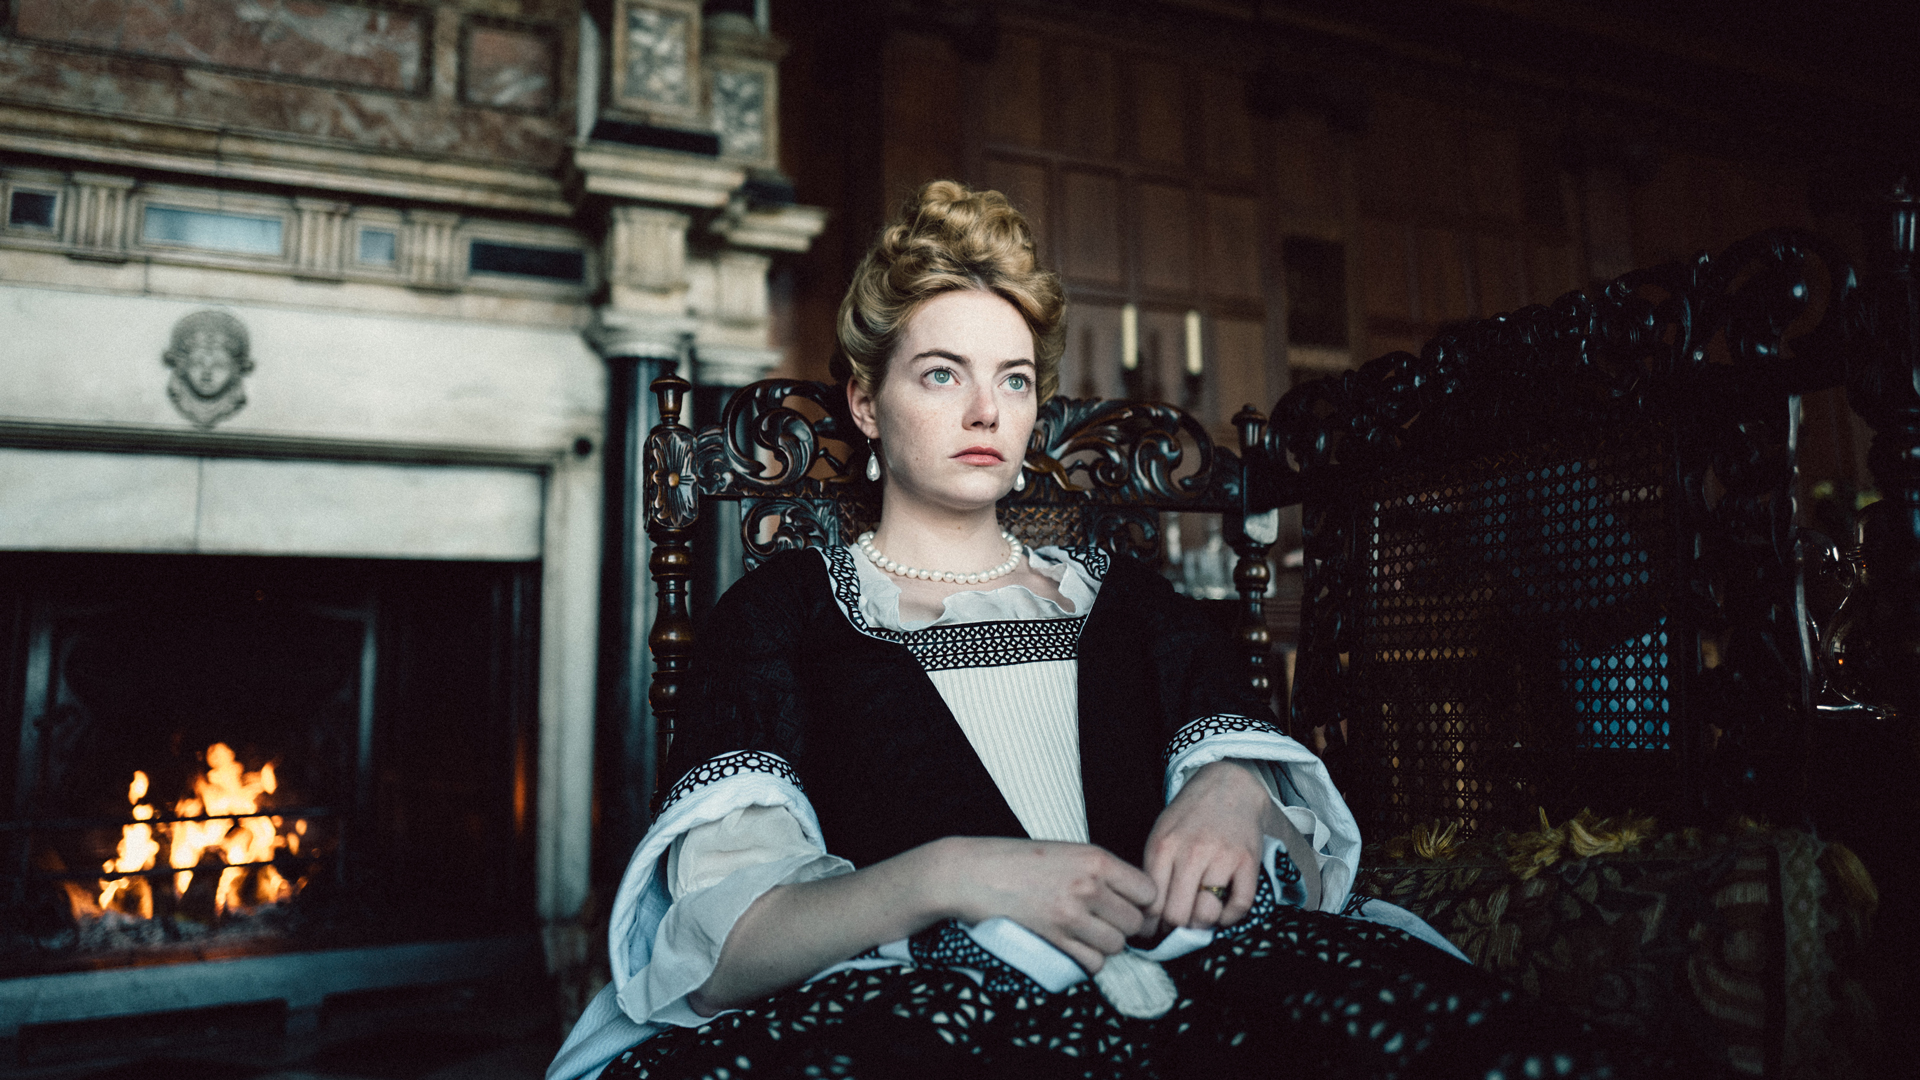 The Favourite 2018 Movie Poster Wallpapers